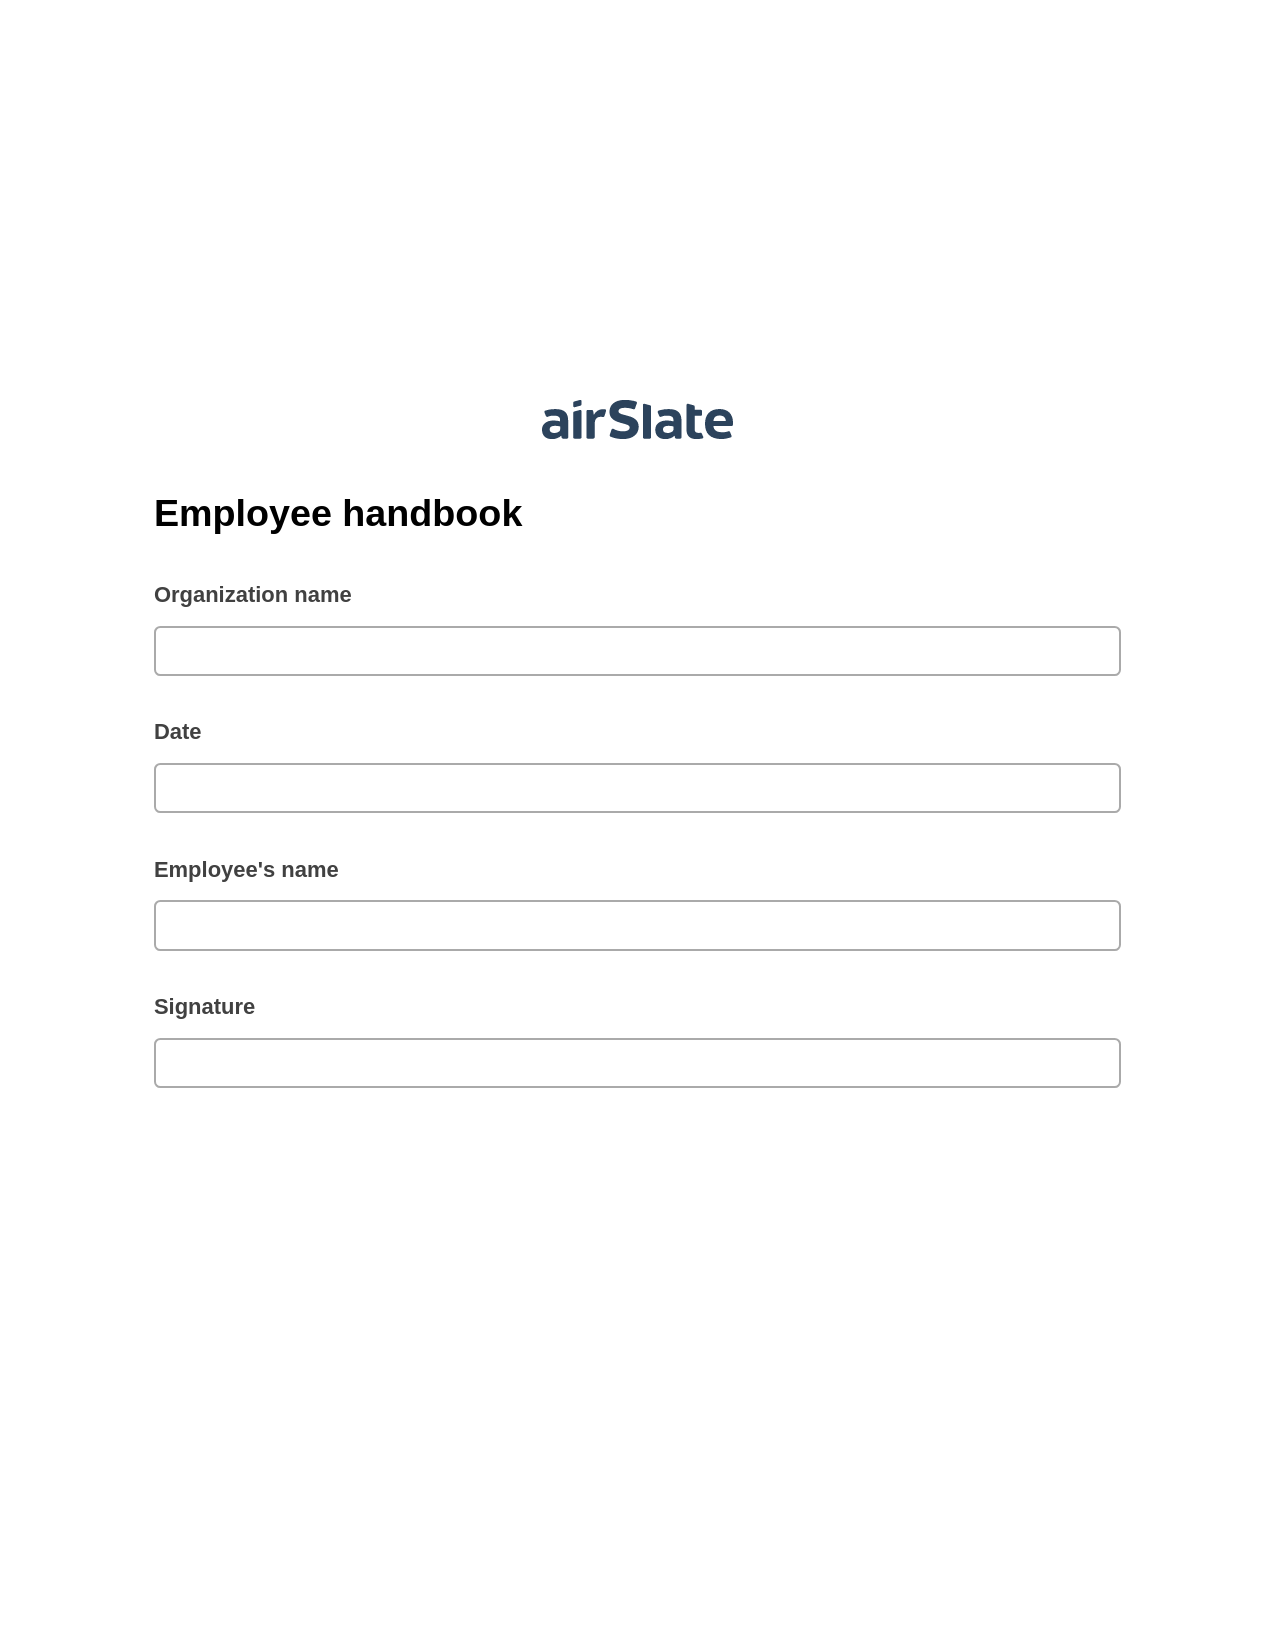 Employee handbook Pre-fill Slate from MS Dynamics 365 Records Bot, Assign Slate Name Bot, Export to Google Sheet Bot